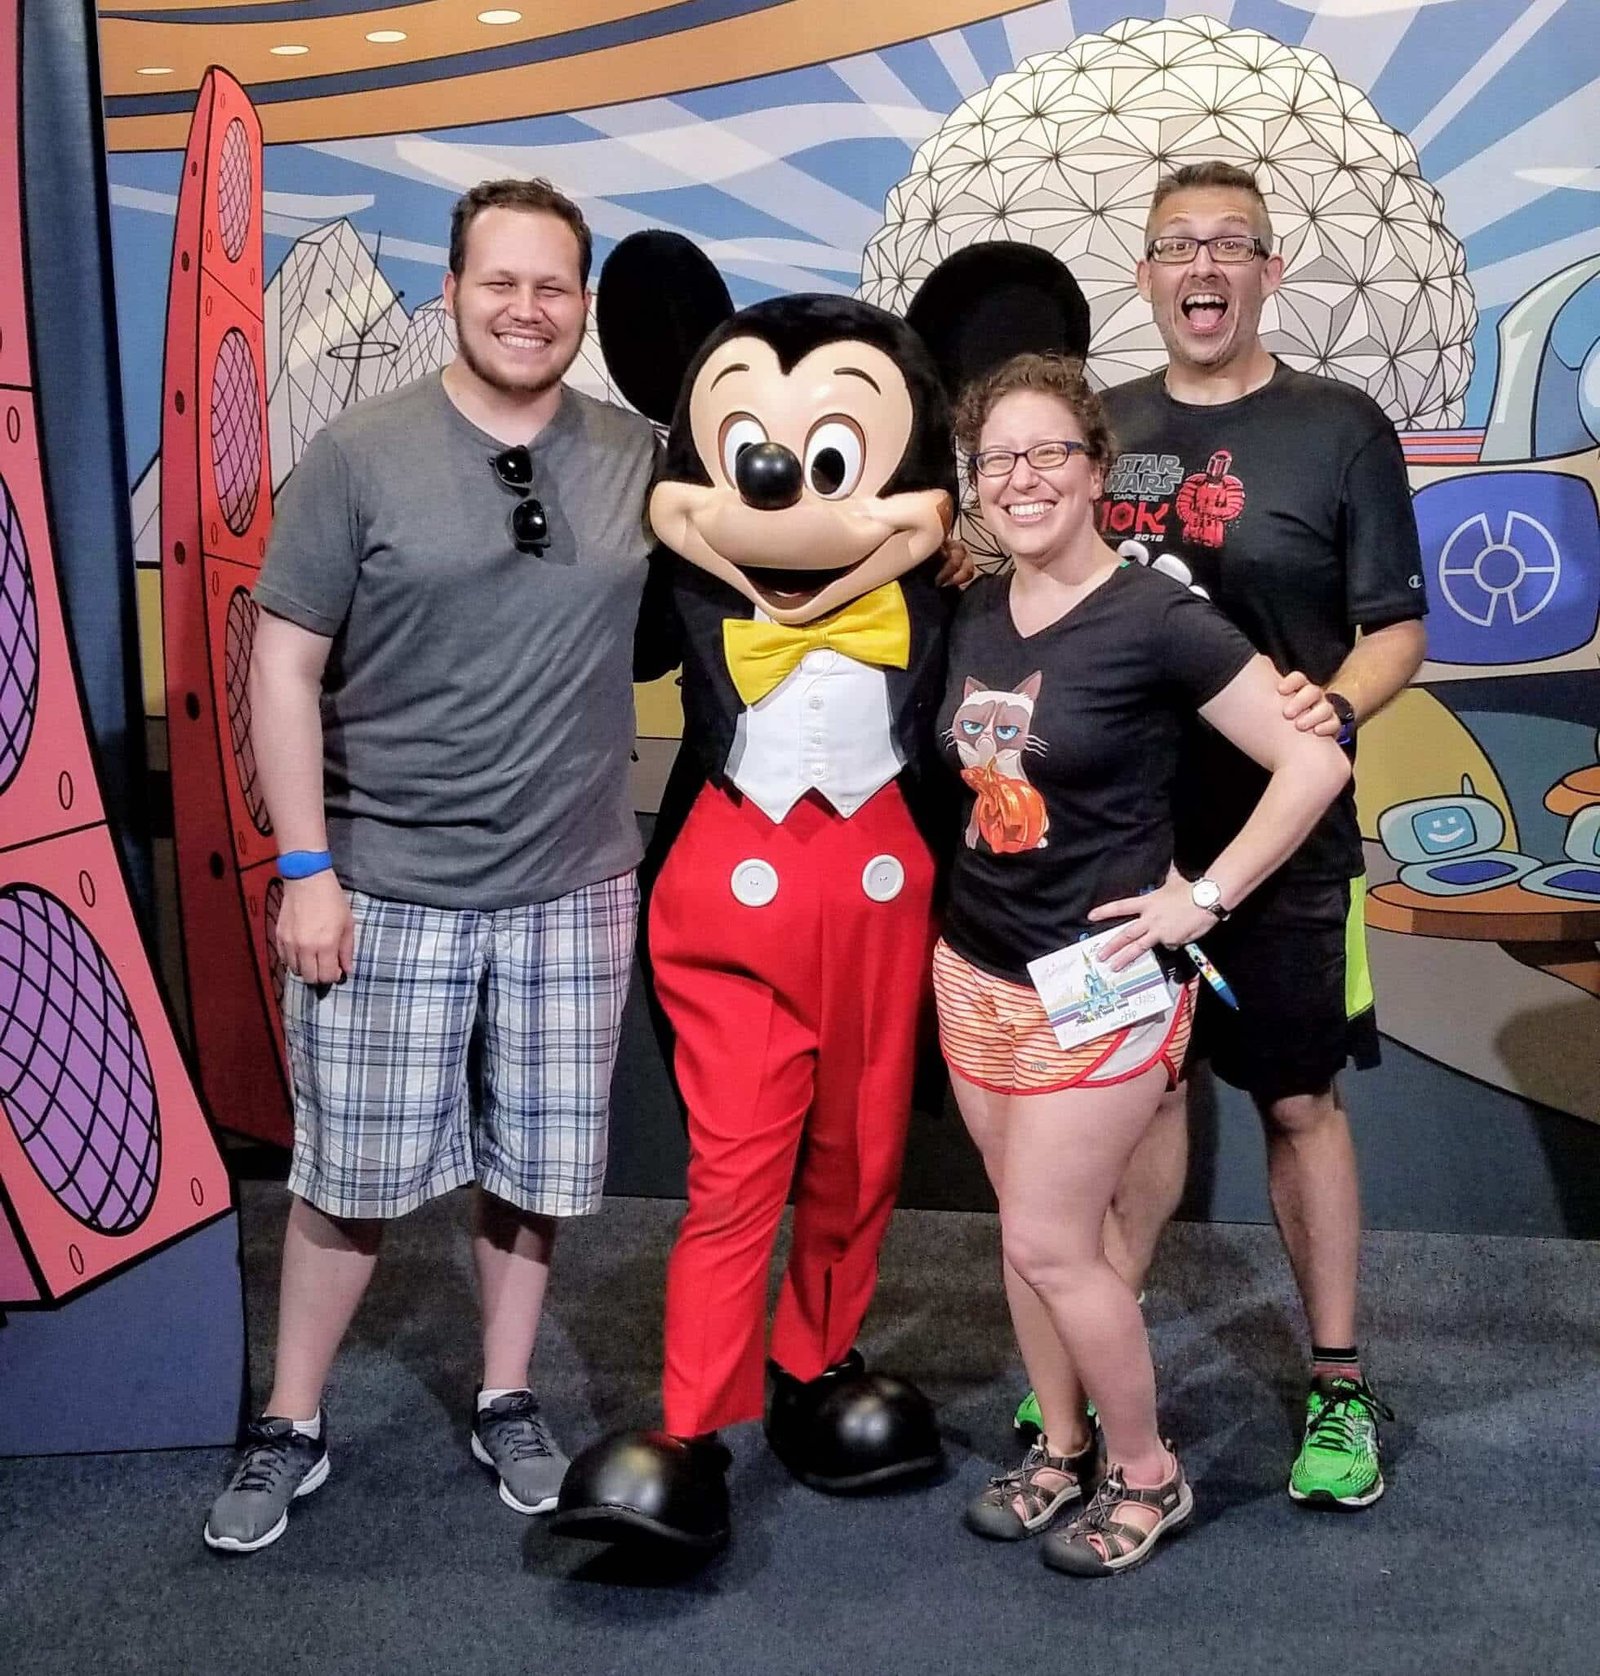 meeting mickey mouse at disney was like meeting a celebrity. It was weird and awesome and I didn't expect that.